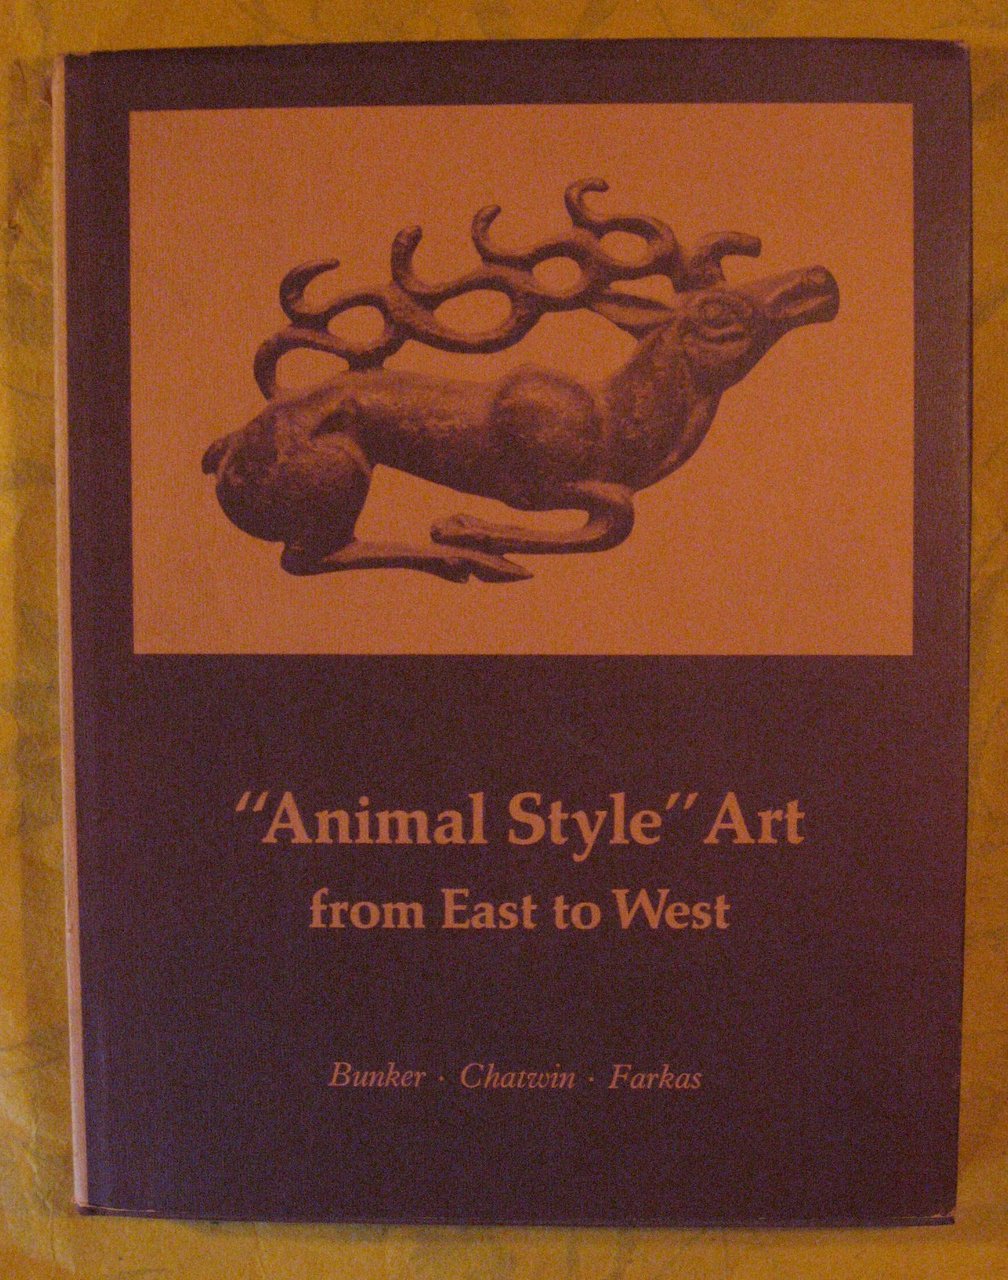 "Animal Style" Art from East to West